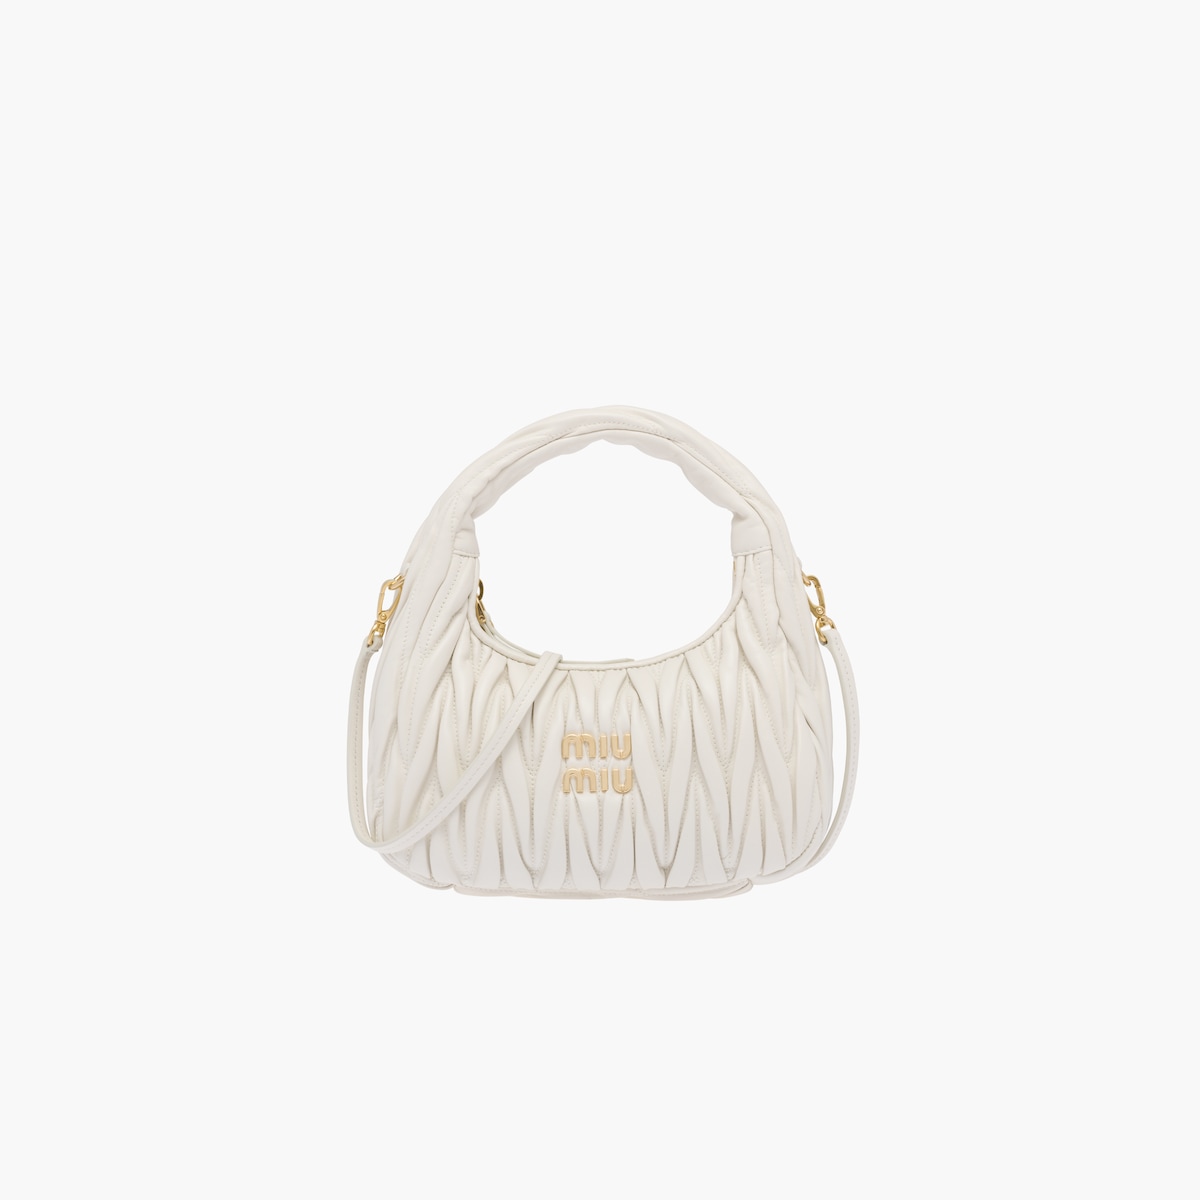 The One Designer Bag That Sells Out Just Hours After Being Listed, WhoWhatWear.com